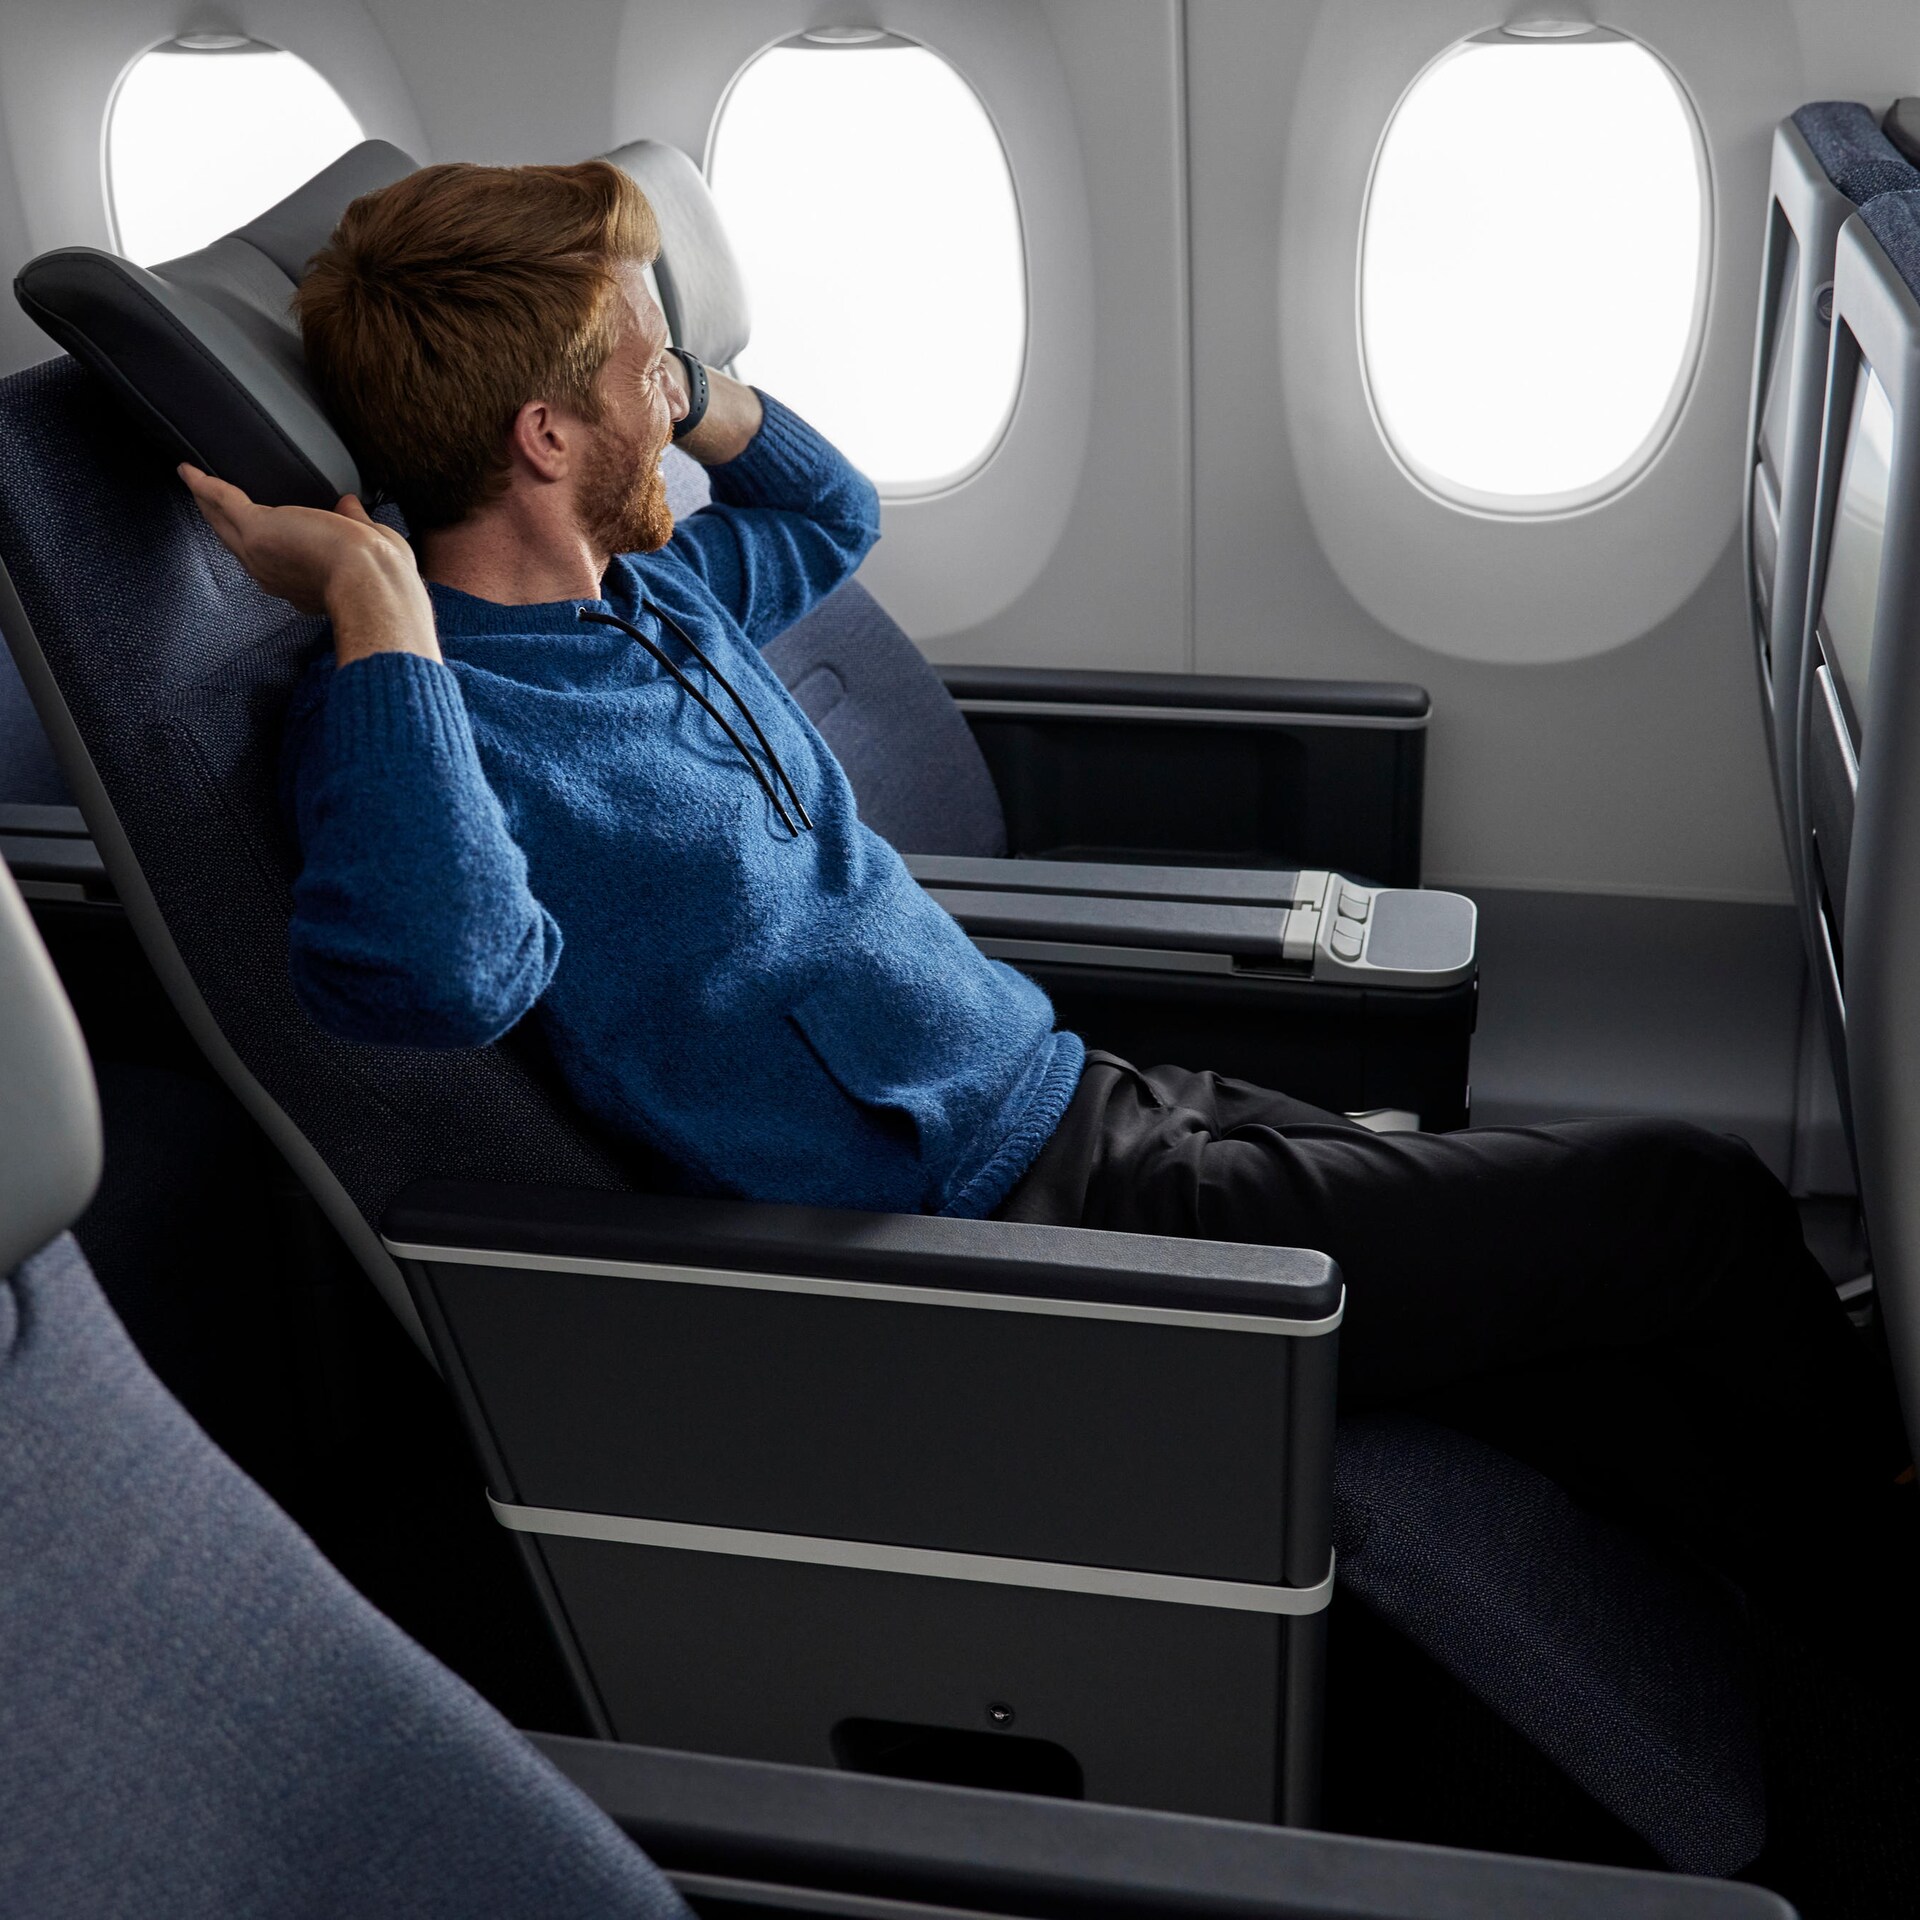 Is United Airlines premium economy worth it on long flights? - The